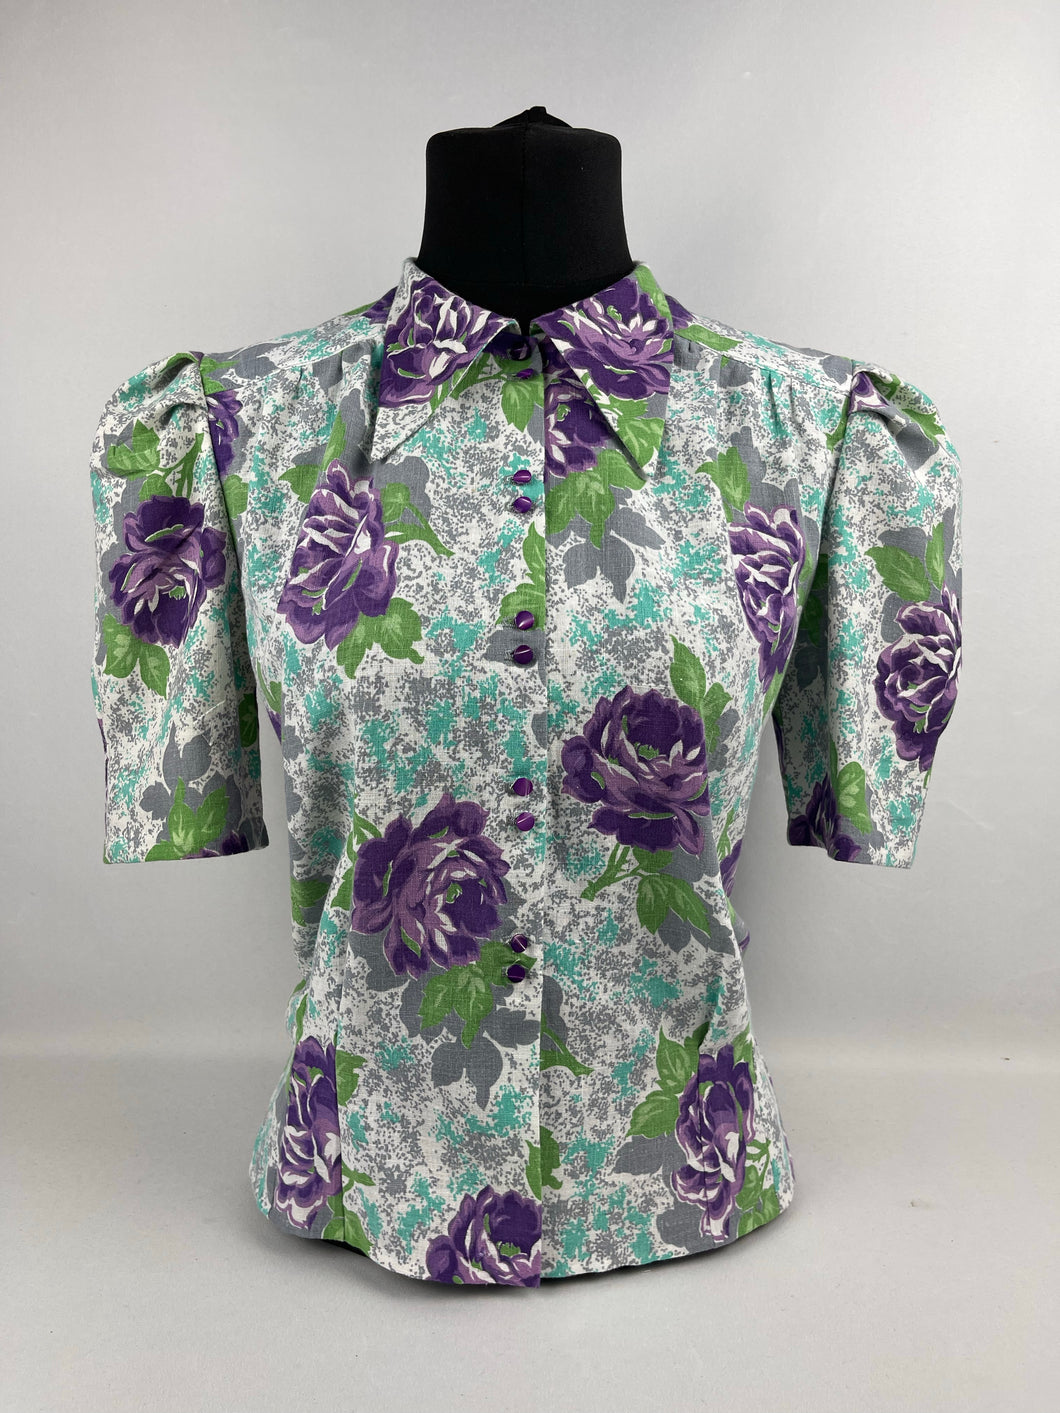 As Is 1940's Reproduction Floral Print Blouse with Large Purple Roses and Tiny Glass Buttons Made From an Original 1940's Feed Sack - Bust 34